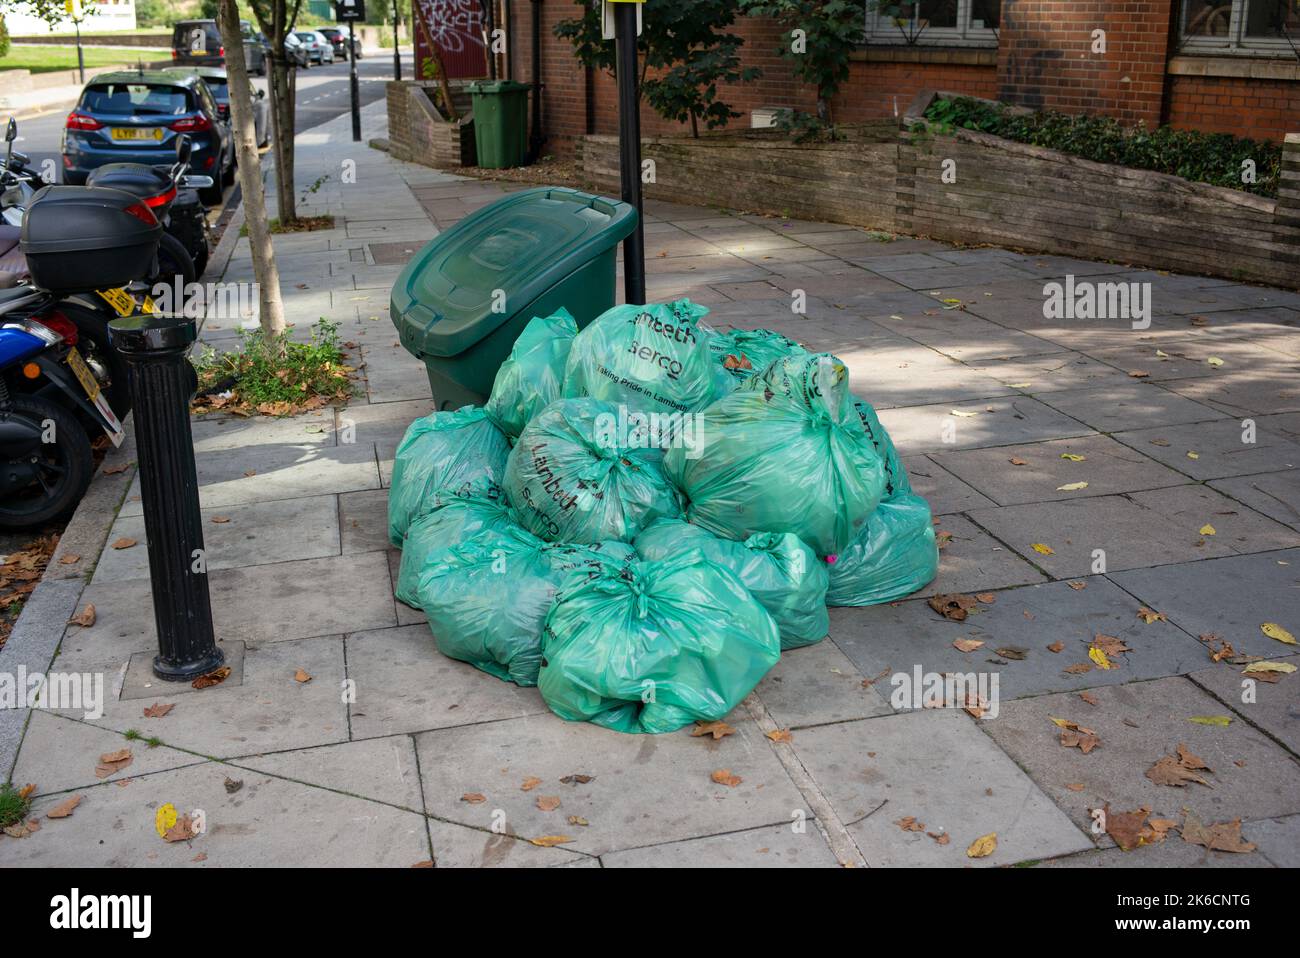 Lambeth Council green waste collection sacks piled up on the street ready for collection in London UK. Stock Photo